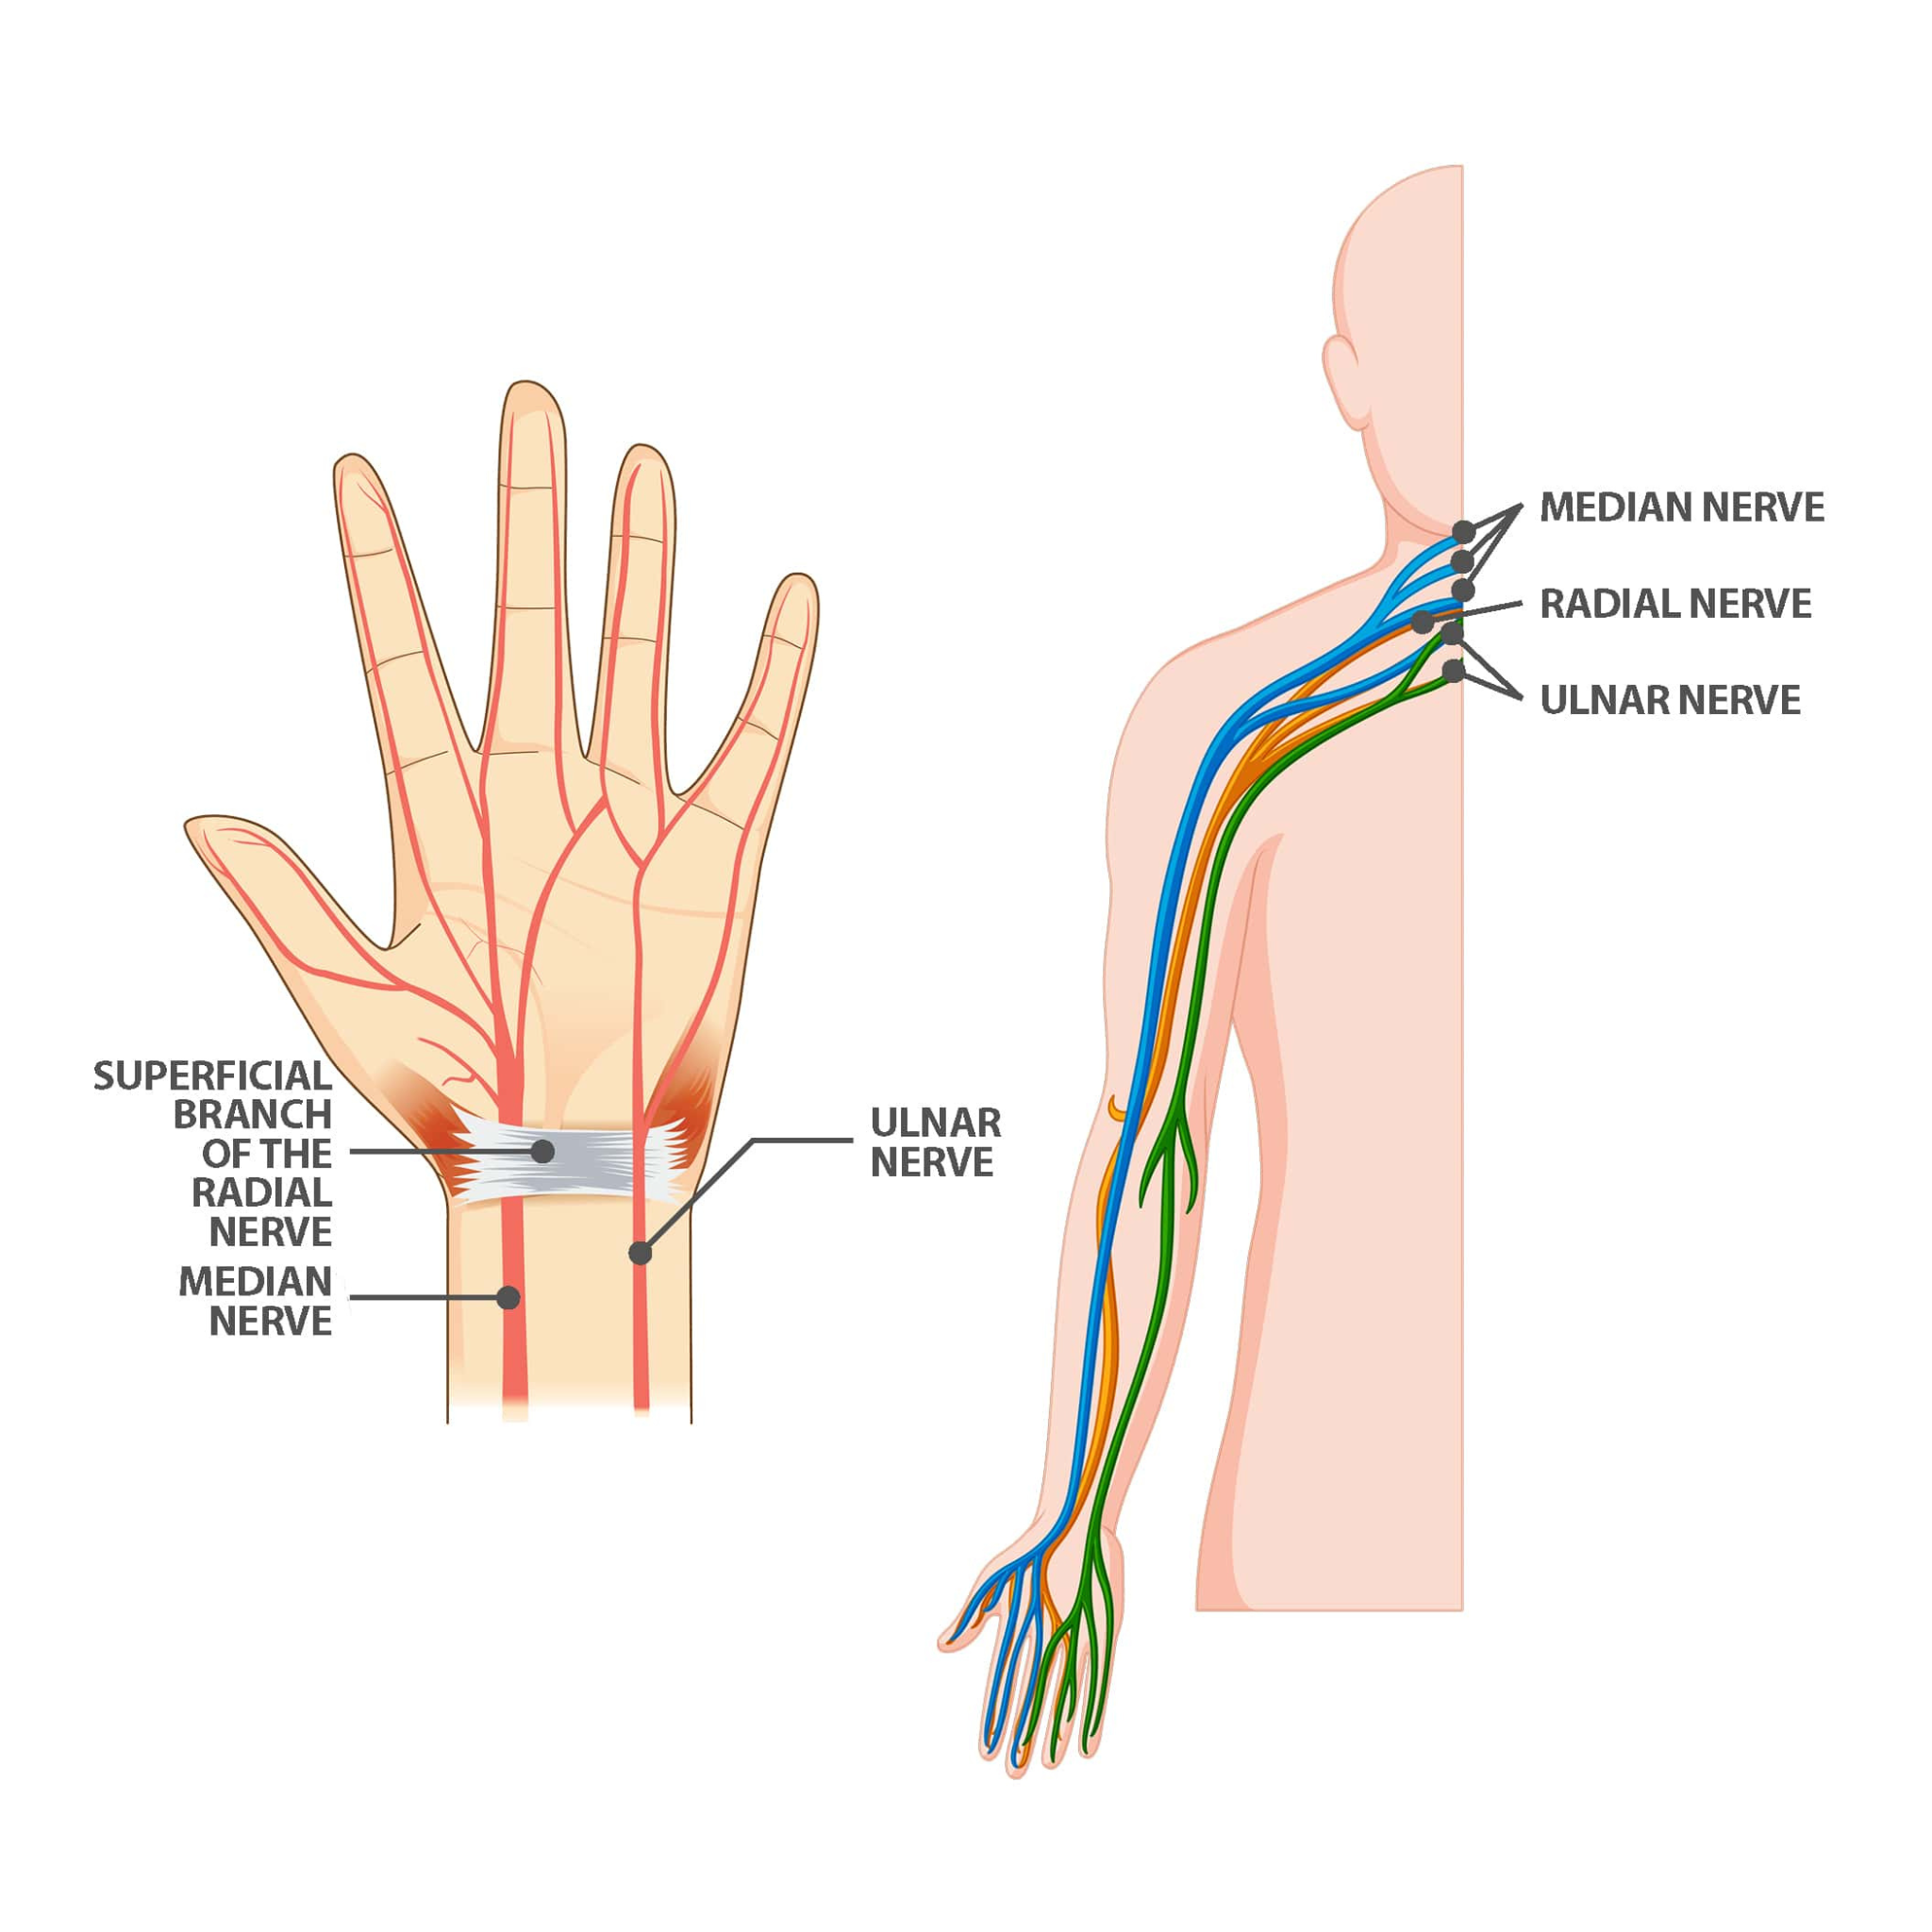 Risk factors related to complications of the fingers and hand after  arthroscopic rotator cuff repair – carpal tunnel syndrome, flexor  tenosynovitis, and complex regional pain syndrome - JSES International